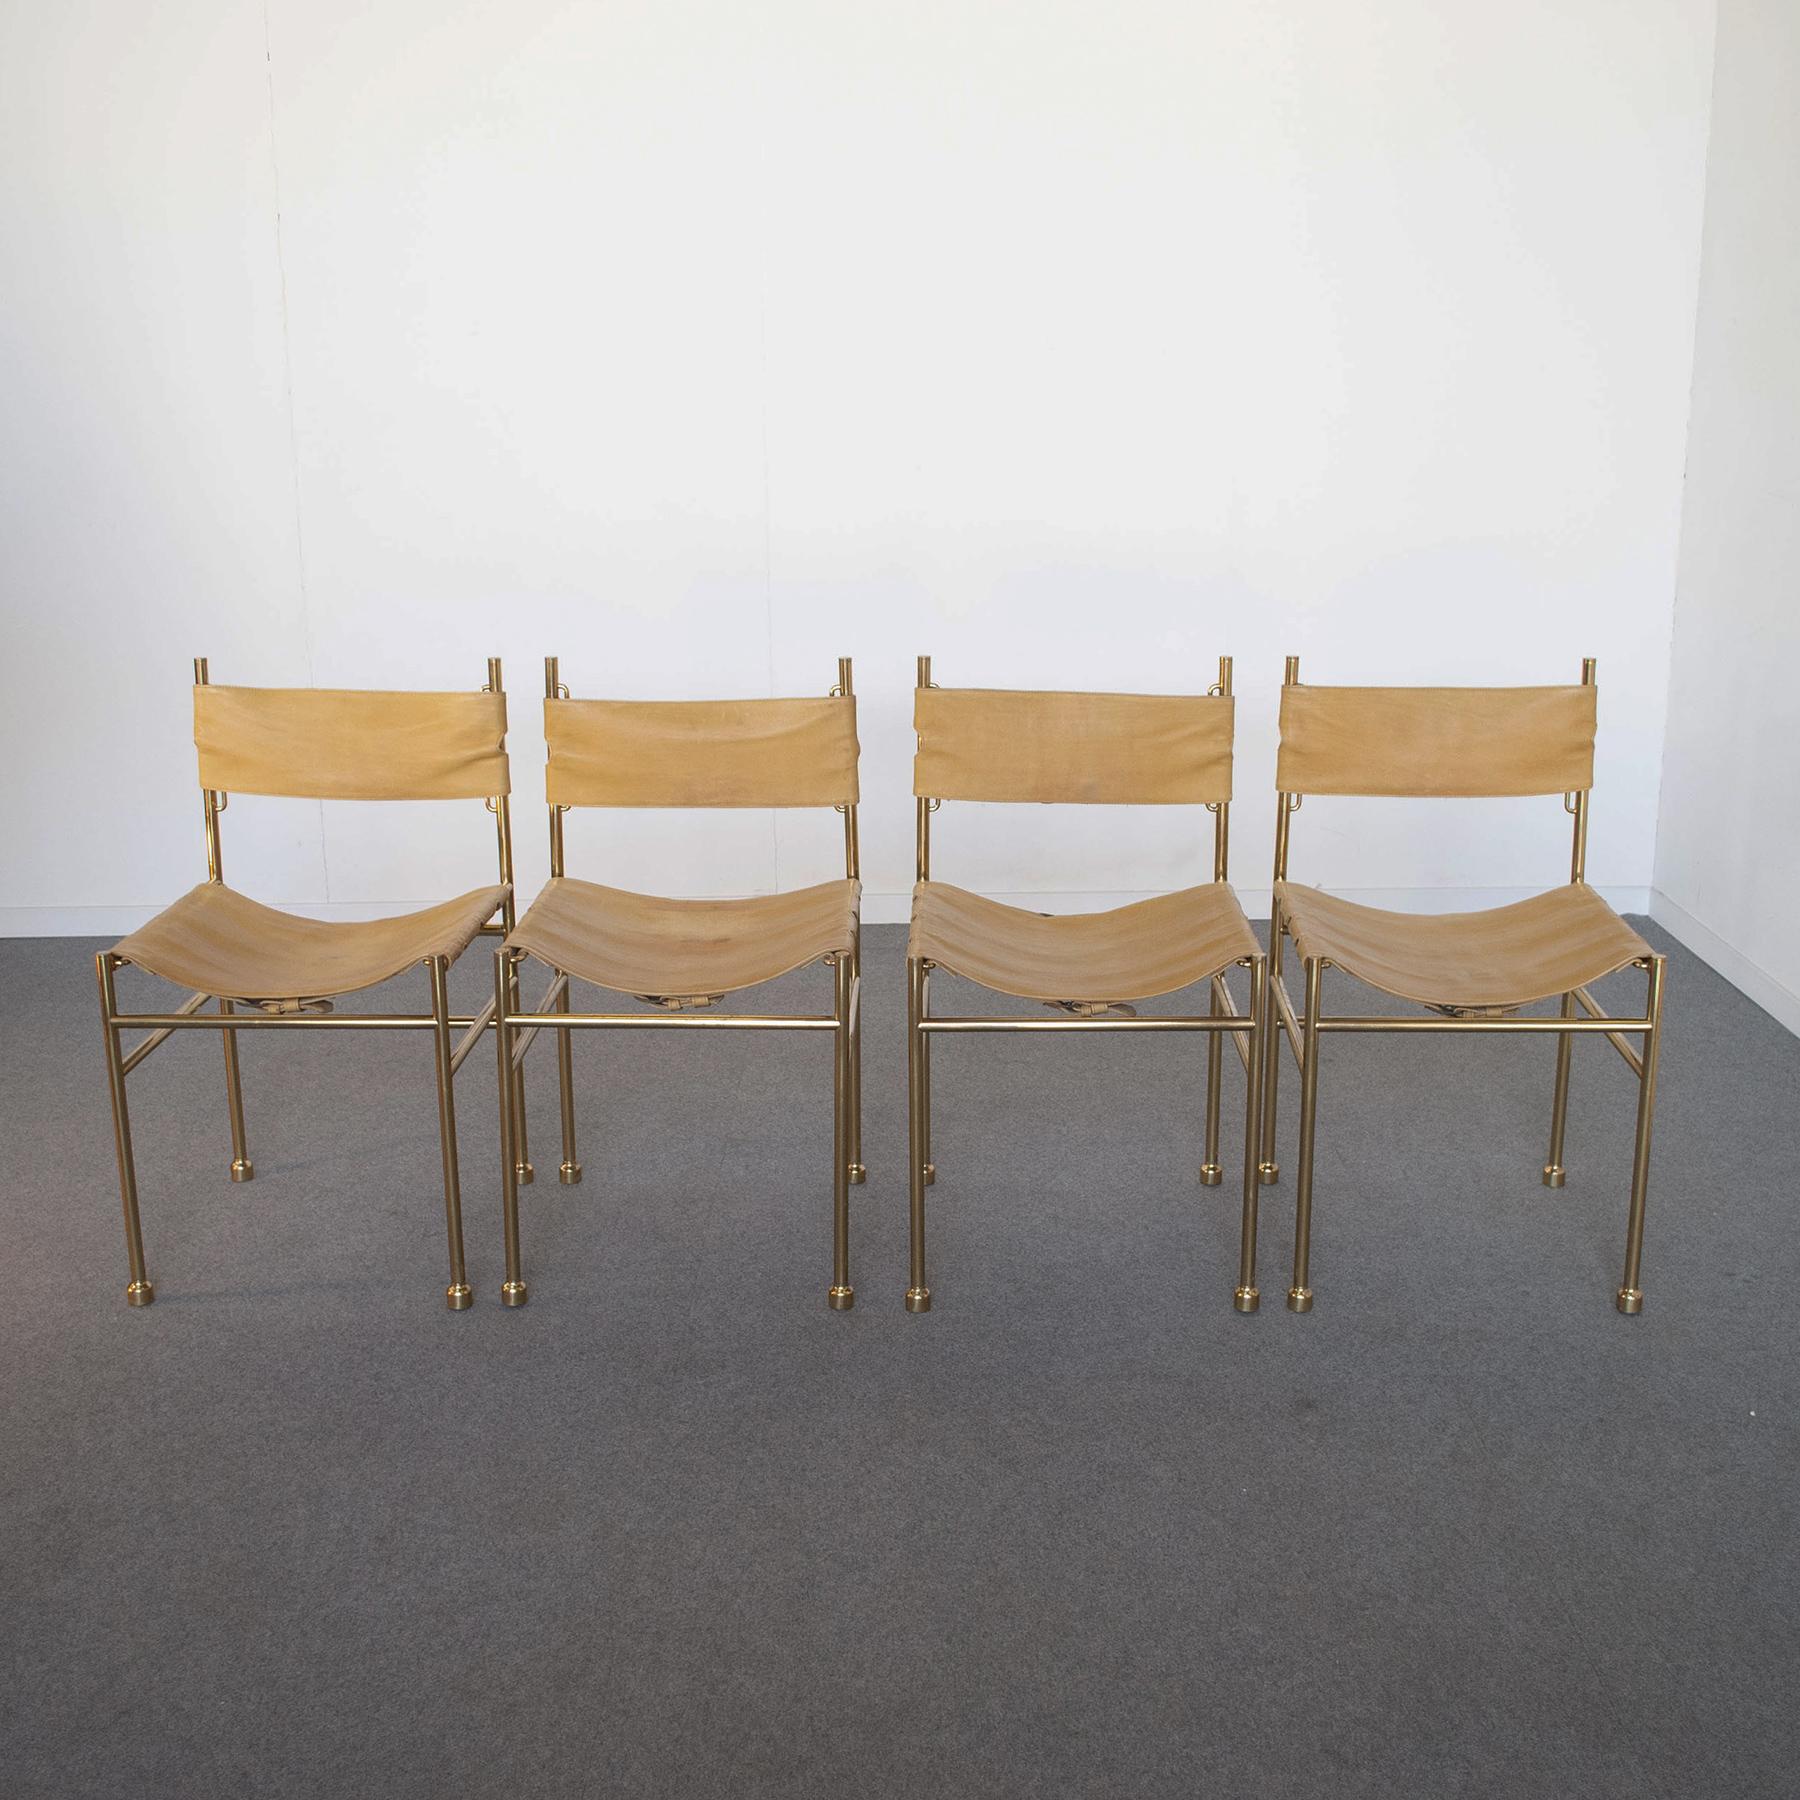 Italian Luciano Frigerio Chairs by Desio from the 70s